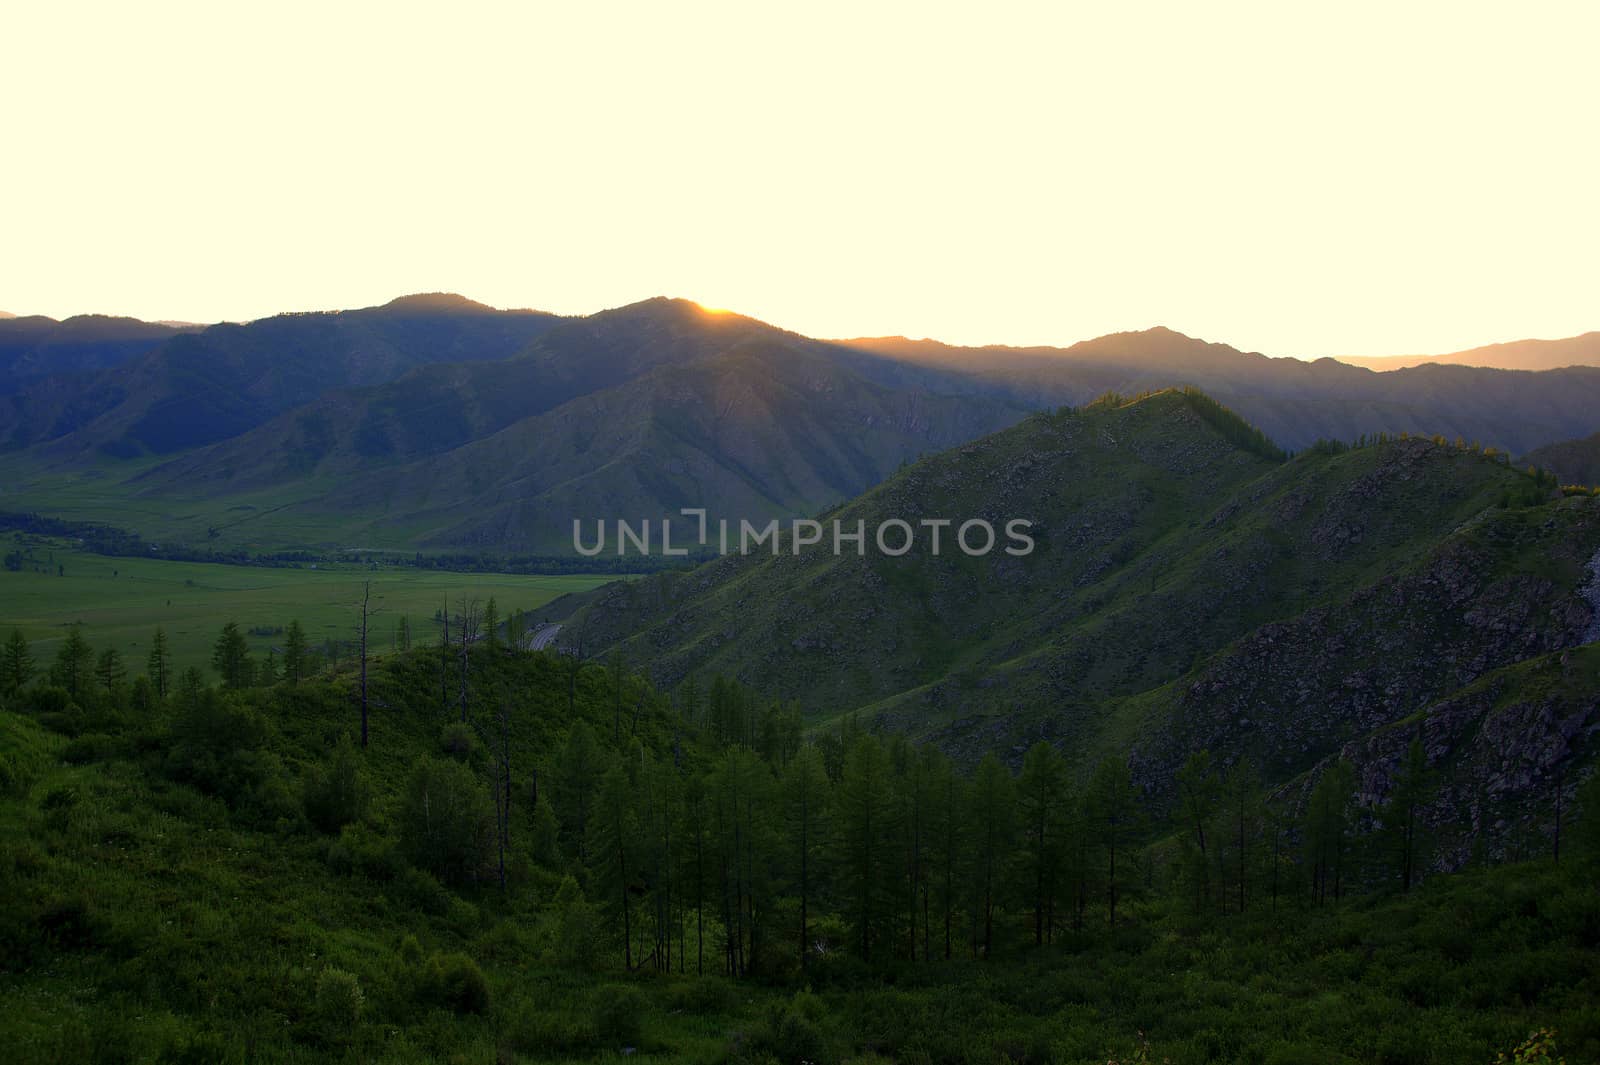 The evening landscape, the setting sun hid behind high mountains, illuminating the picturesque valley with its rays. Altai, Siberia, Russia.